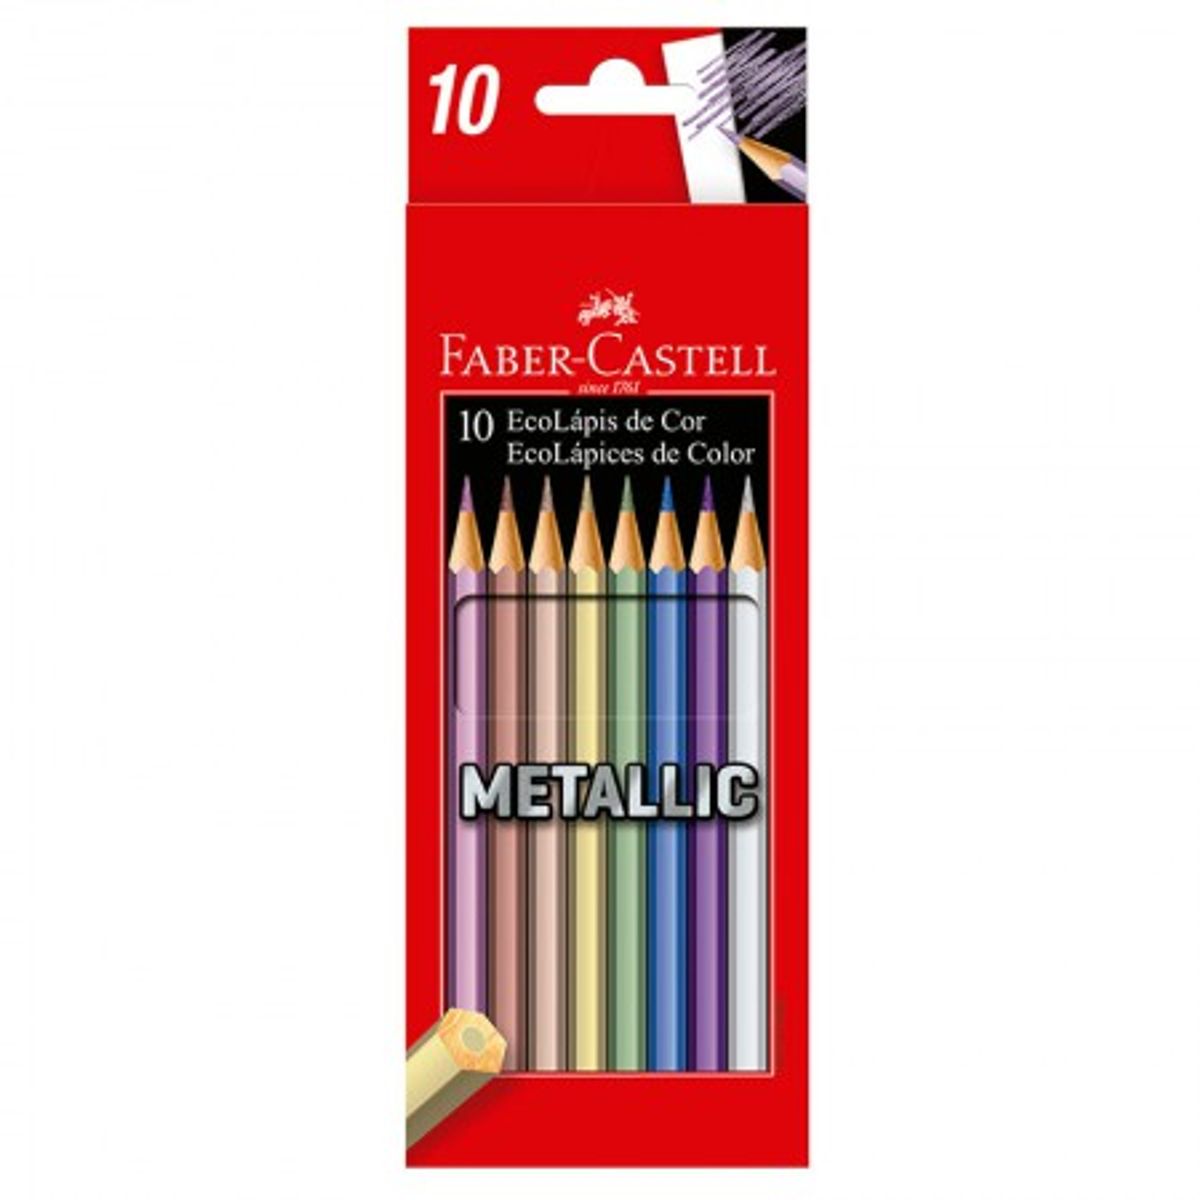 Ecolapis Faber Castell 10 Cores Metal image number 0